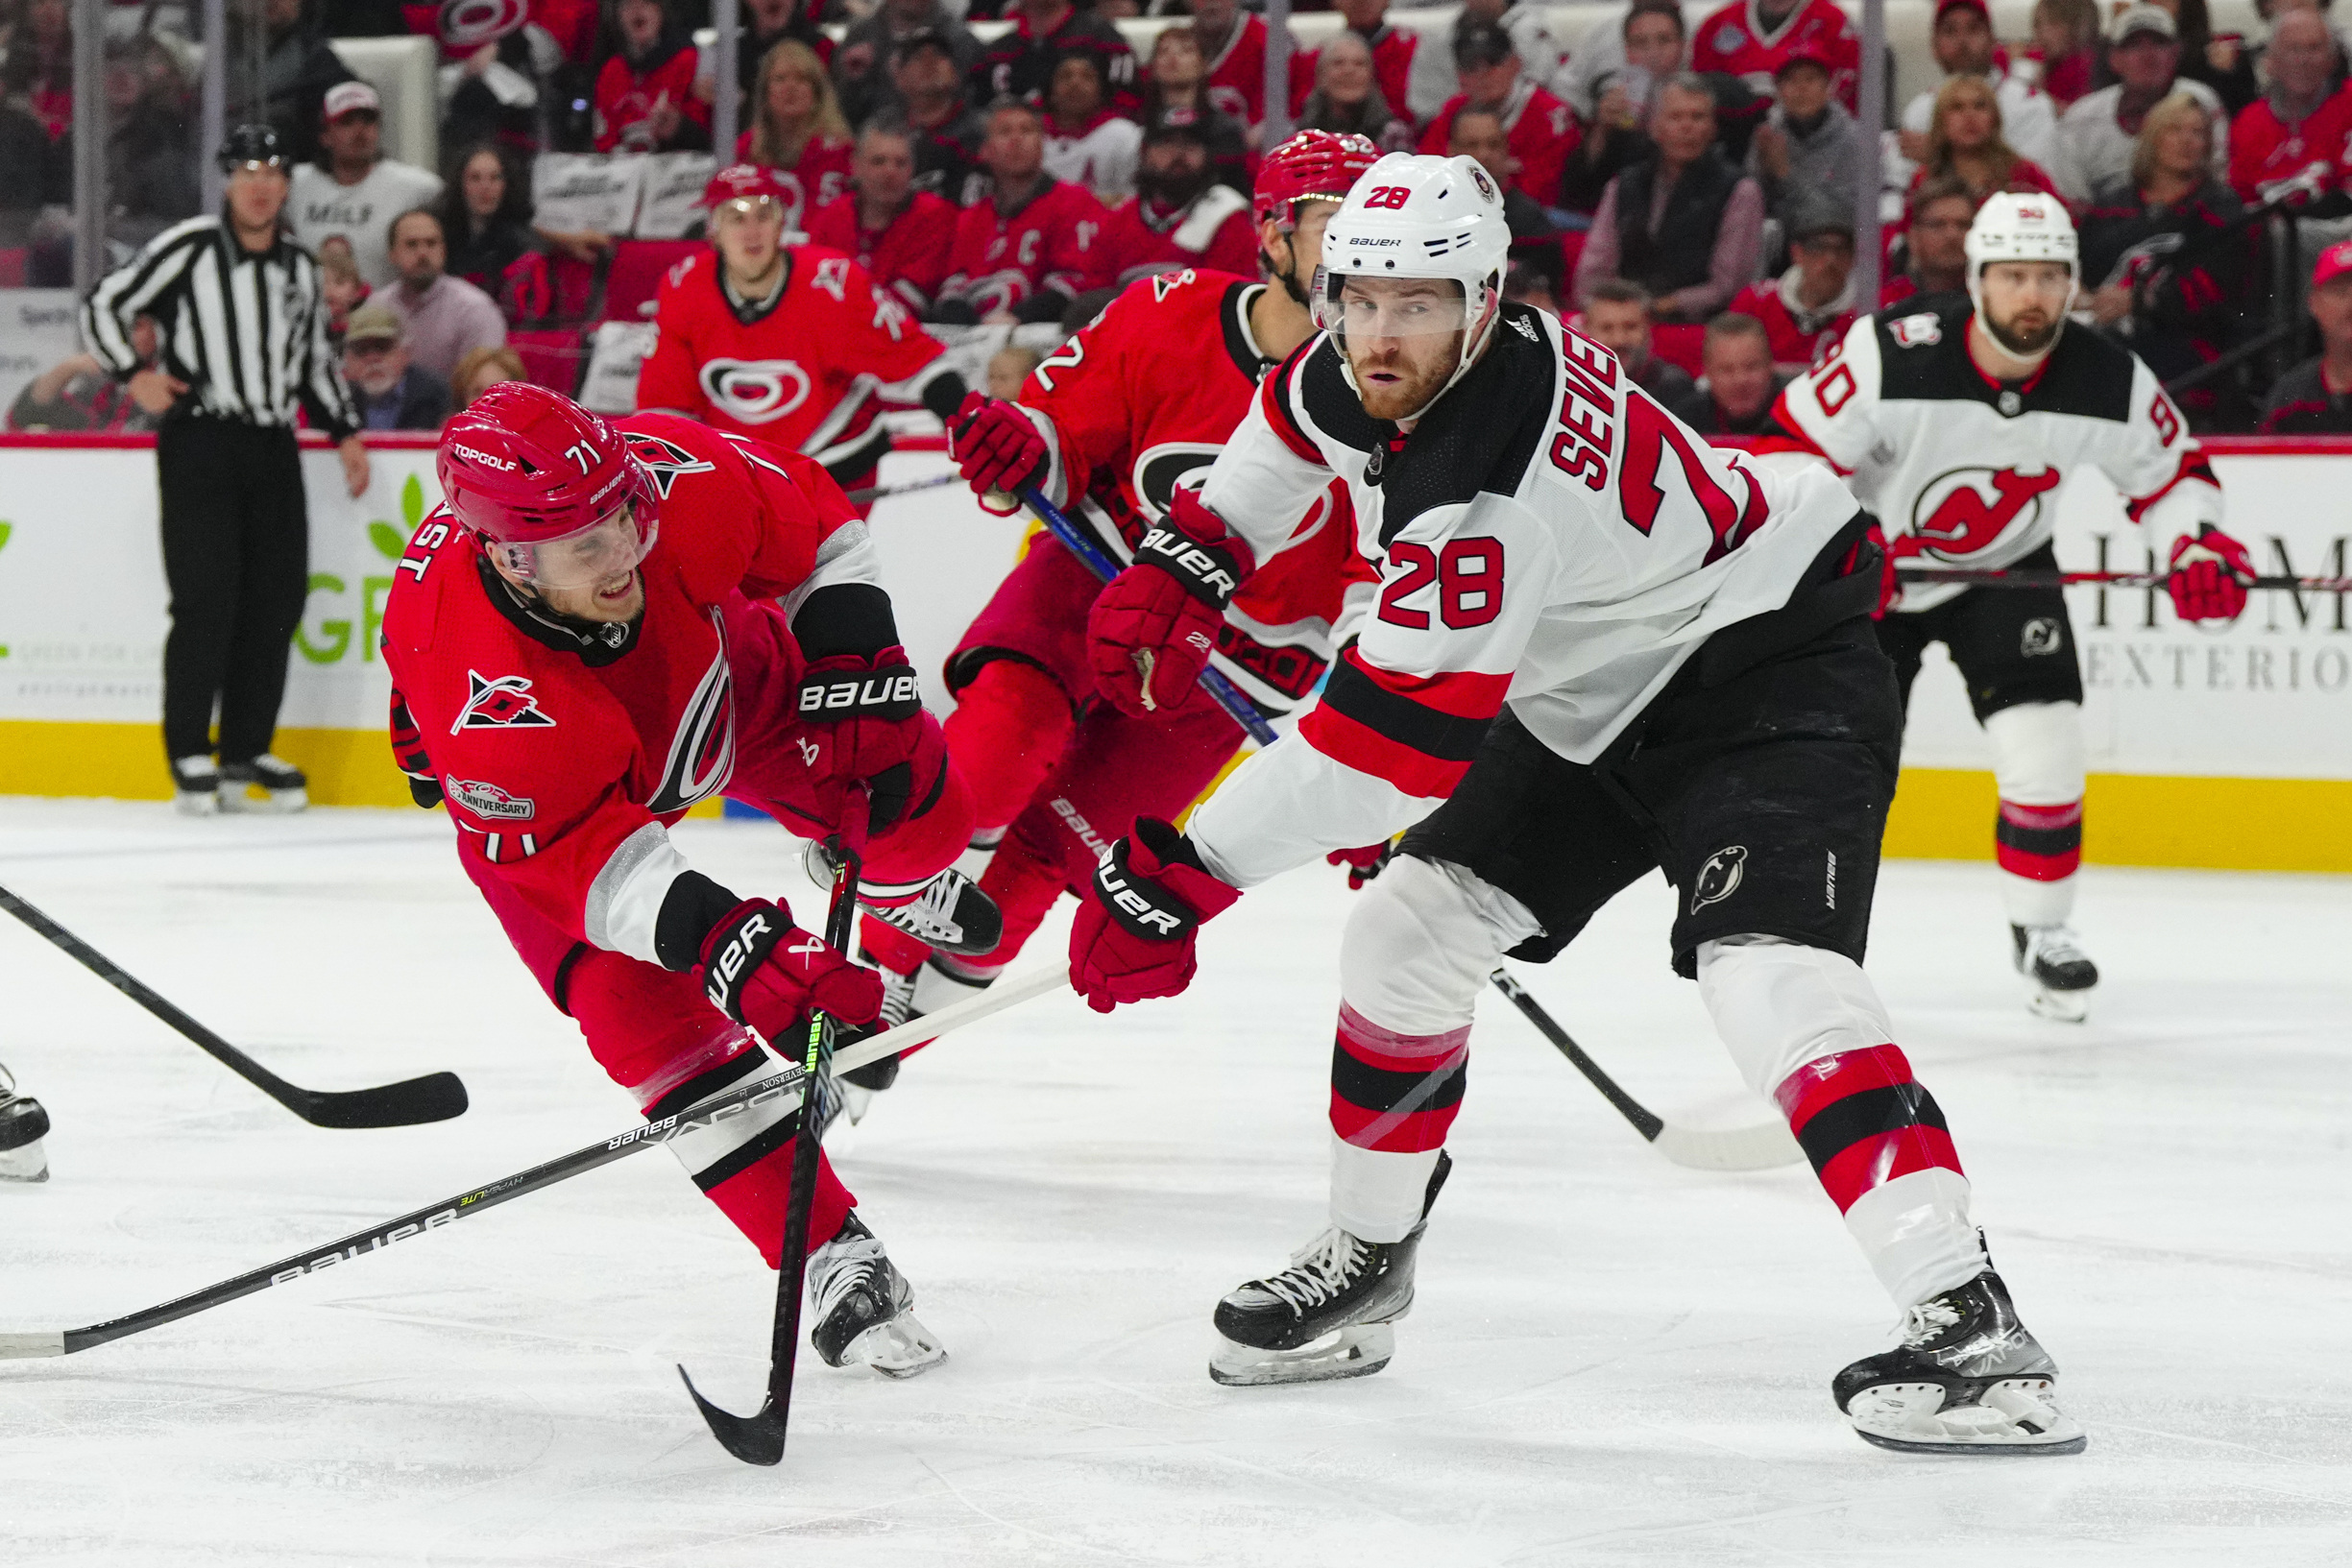 Devils dominate Hurricanes in Game 3 to get back into series